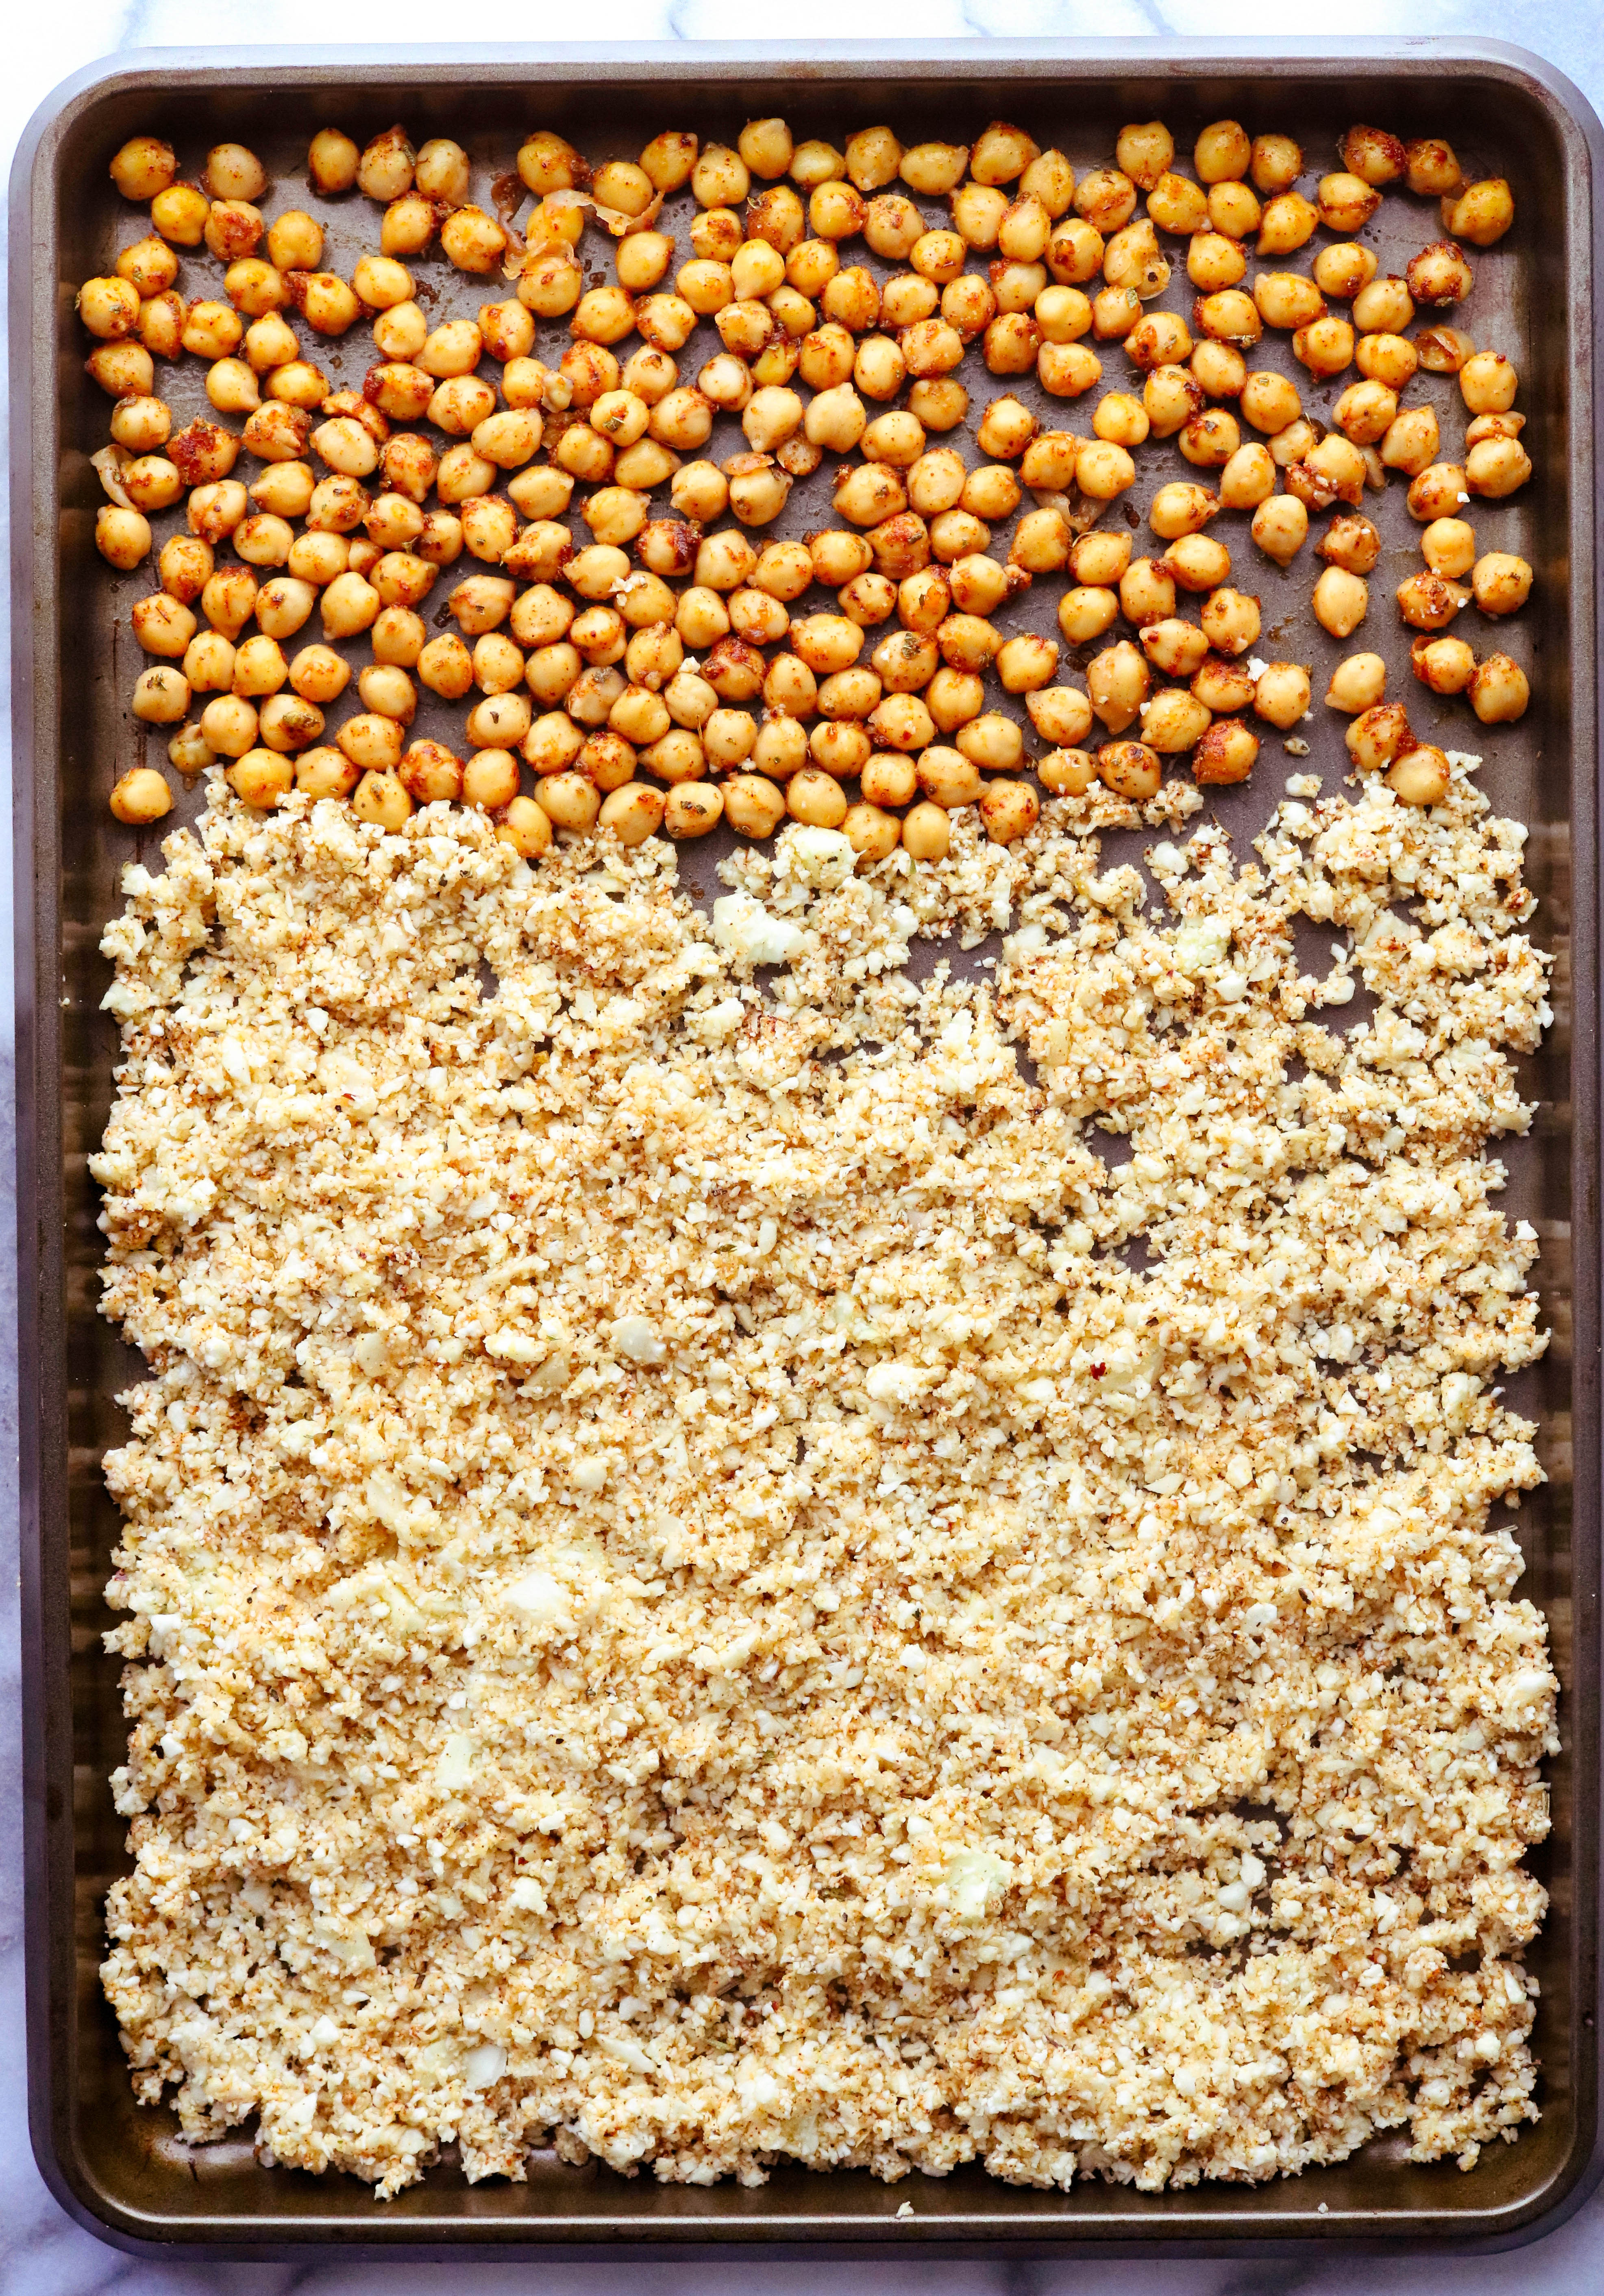 Roasted cauliflower rice on a sheet pan with chickpeas